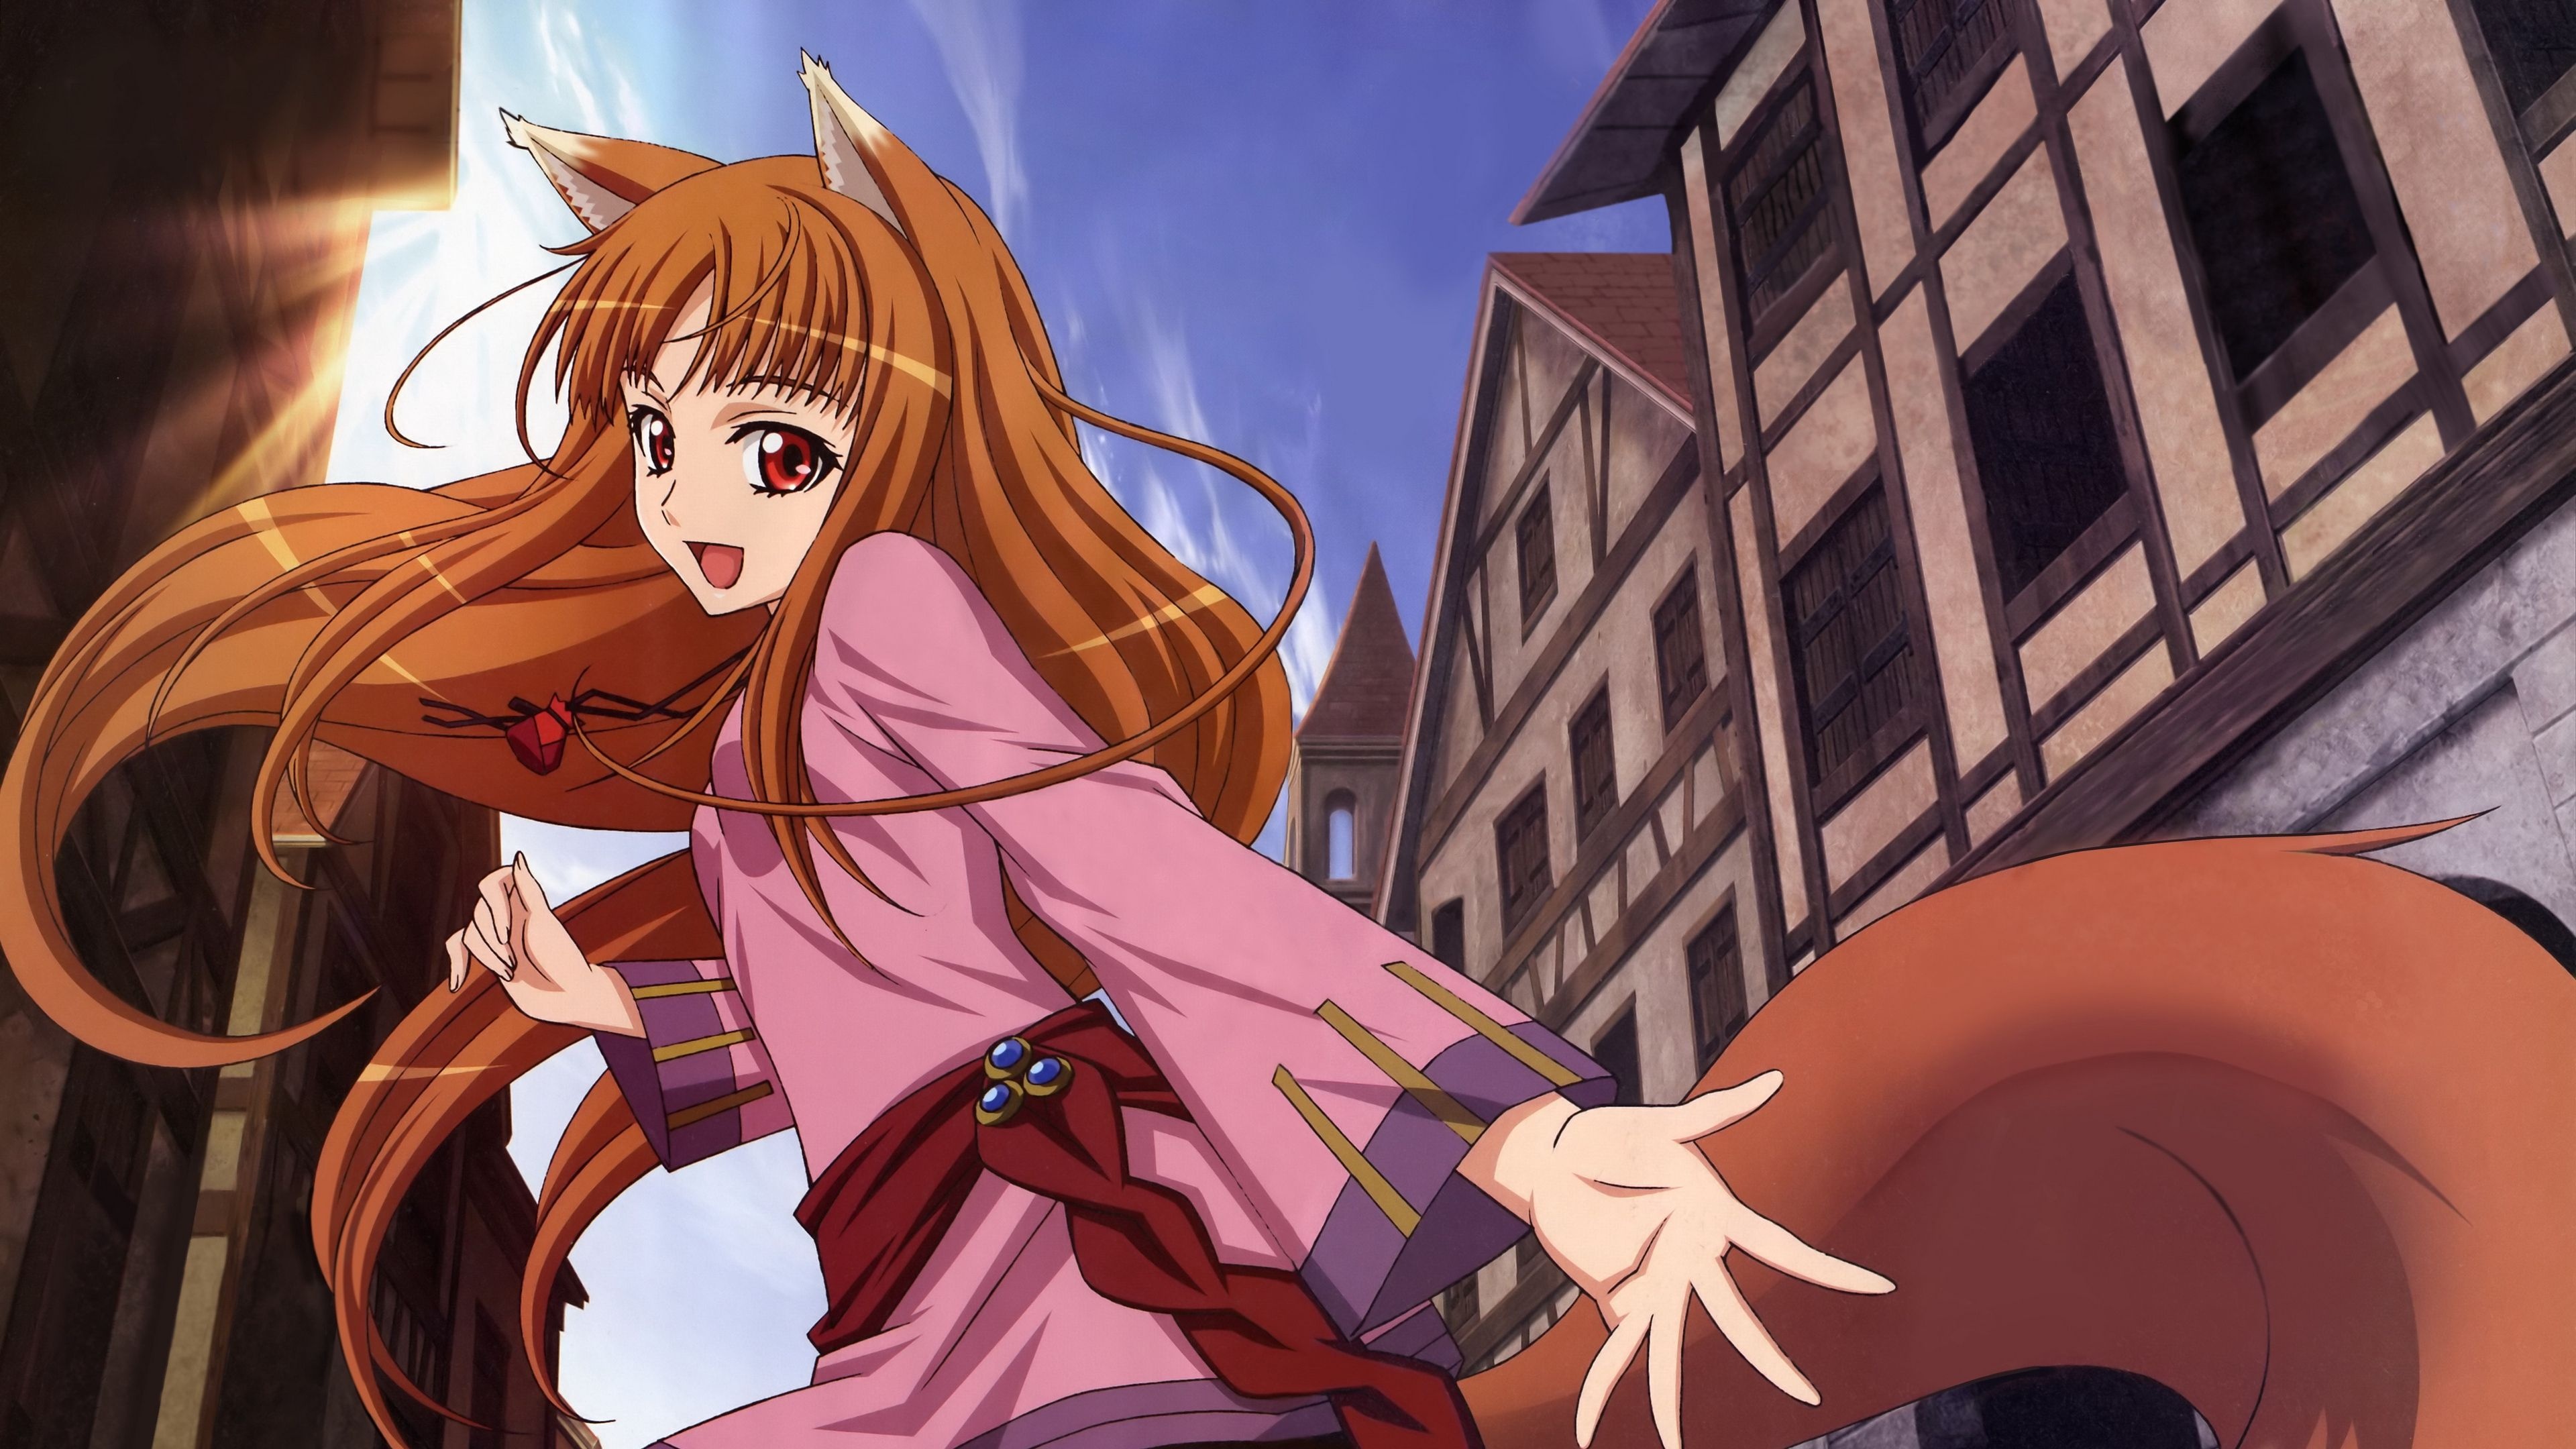 Spice and Wolf (Anime): Holo, Tail, Nonhuman, Wolf spirit. 3840x2160 4K Wallpaper.